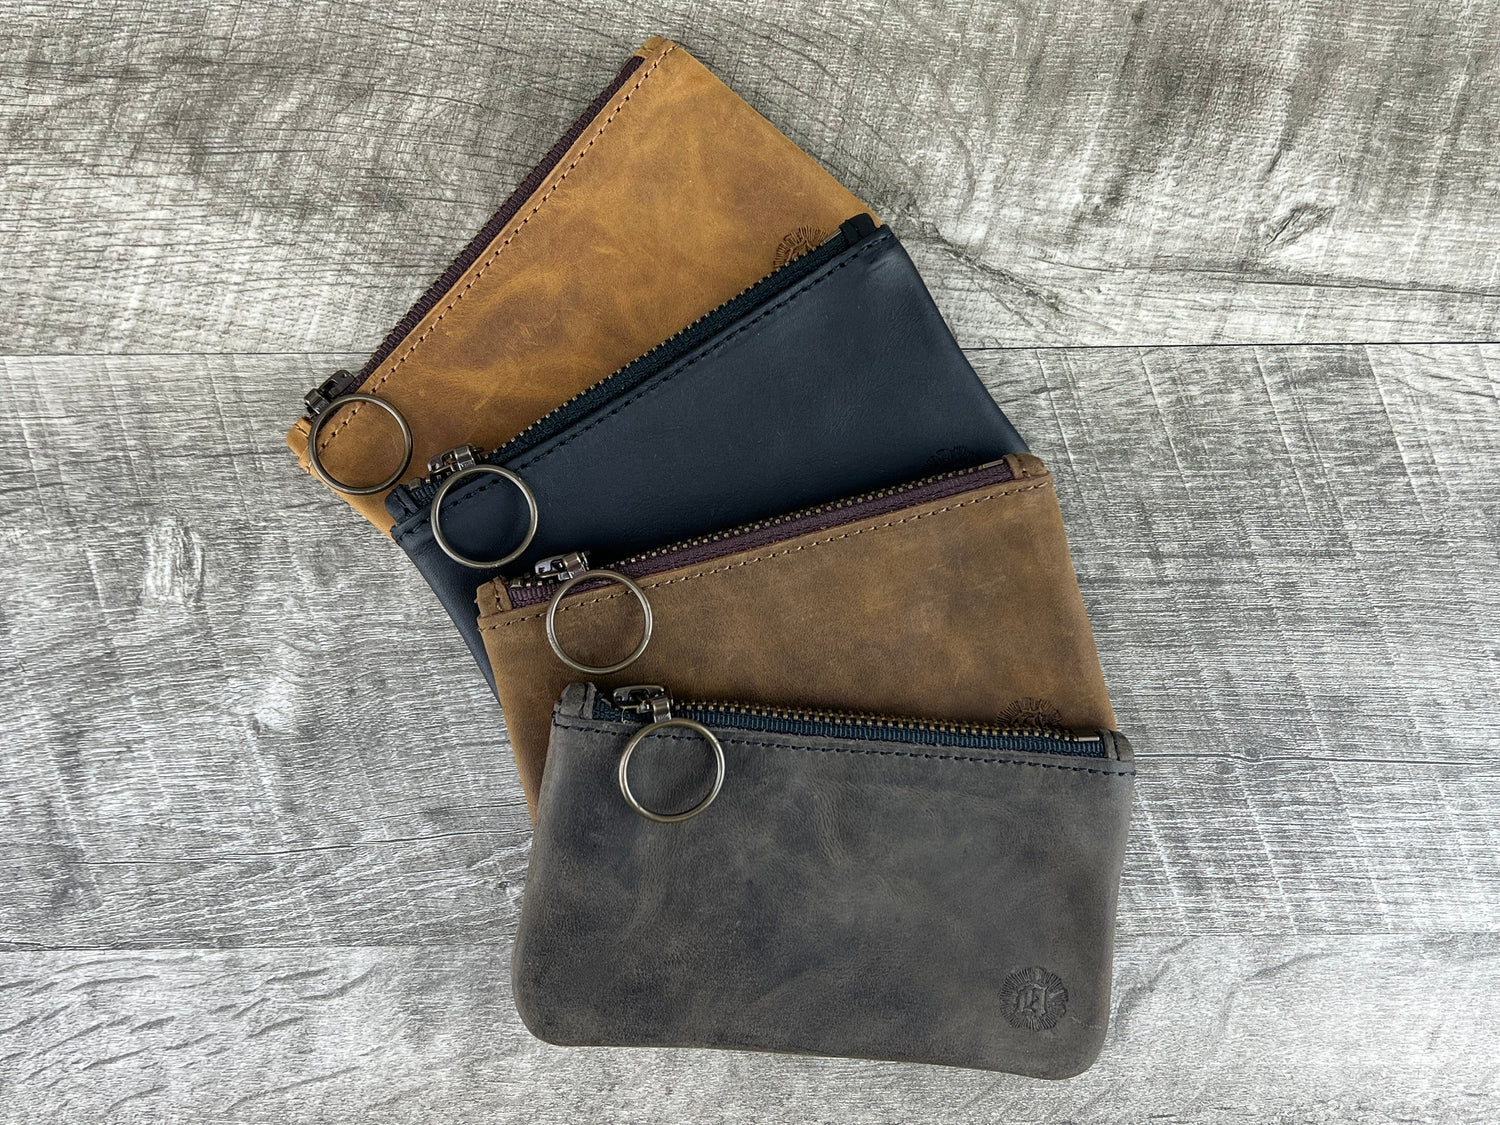 Keep Organized with Our New Leather Pouches